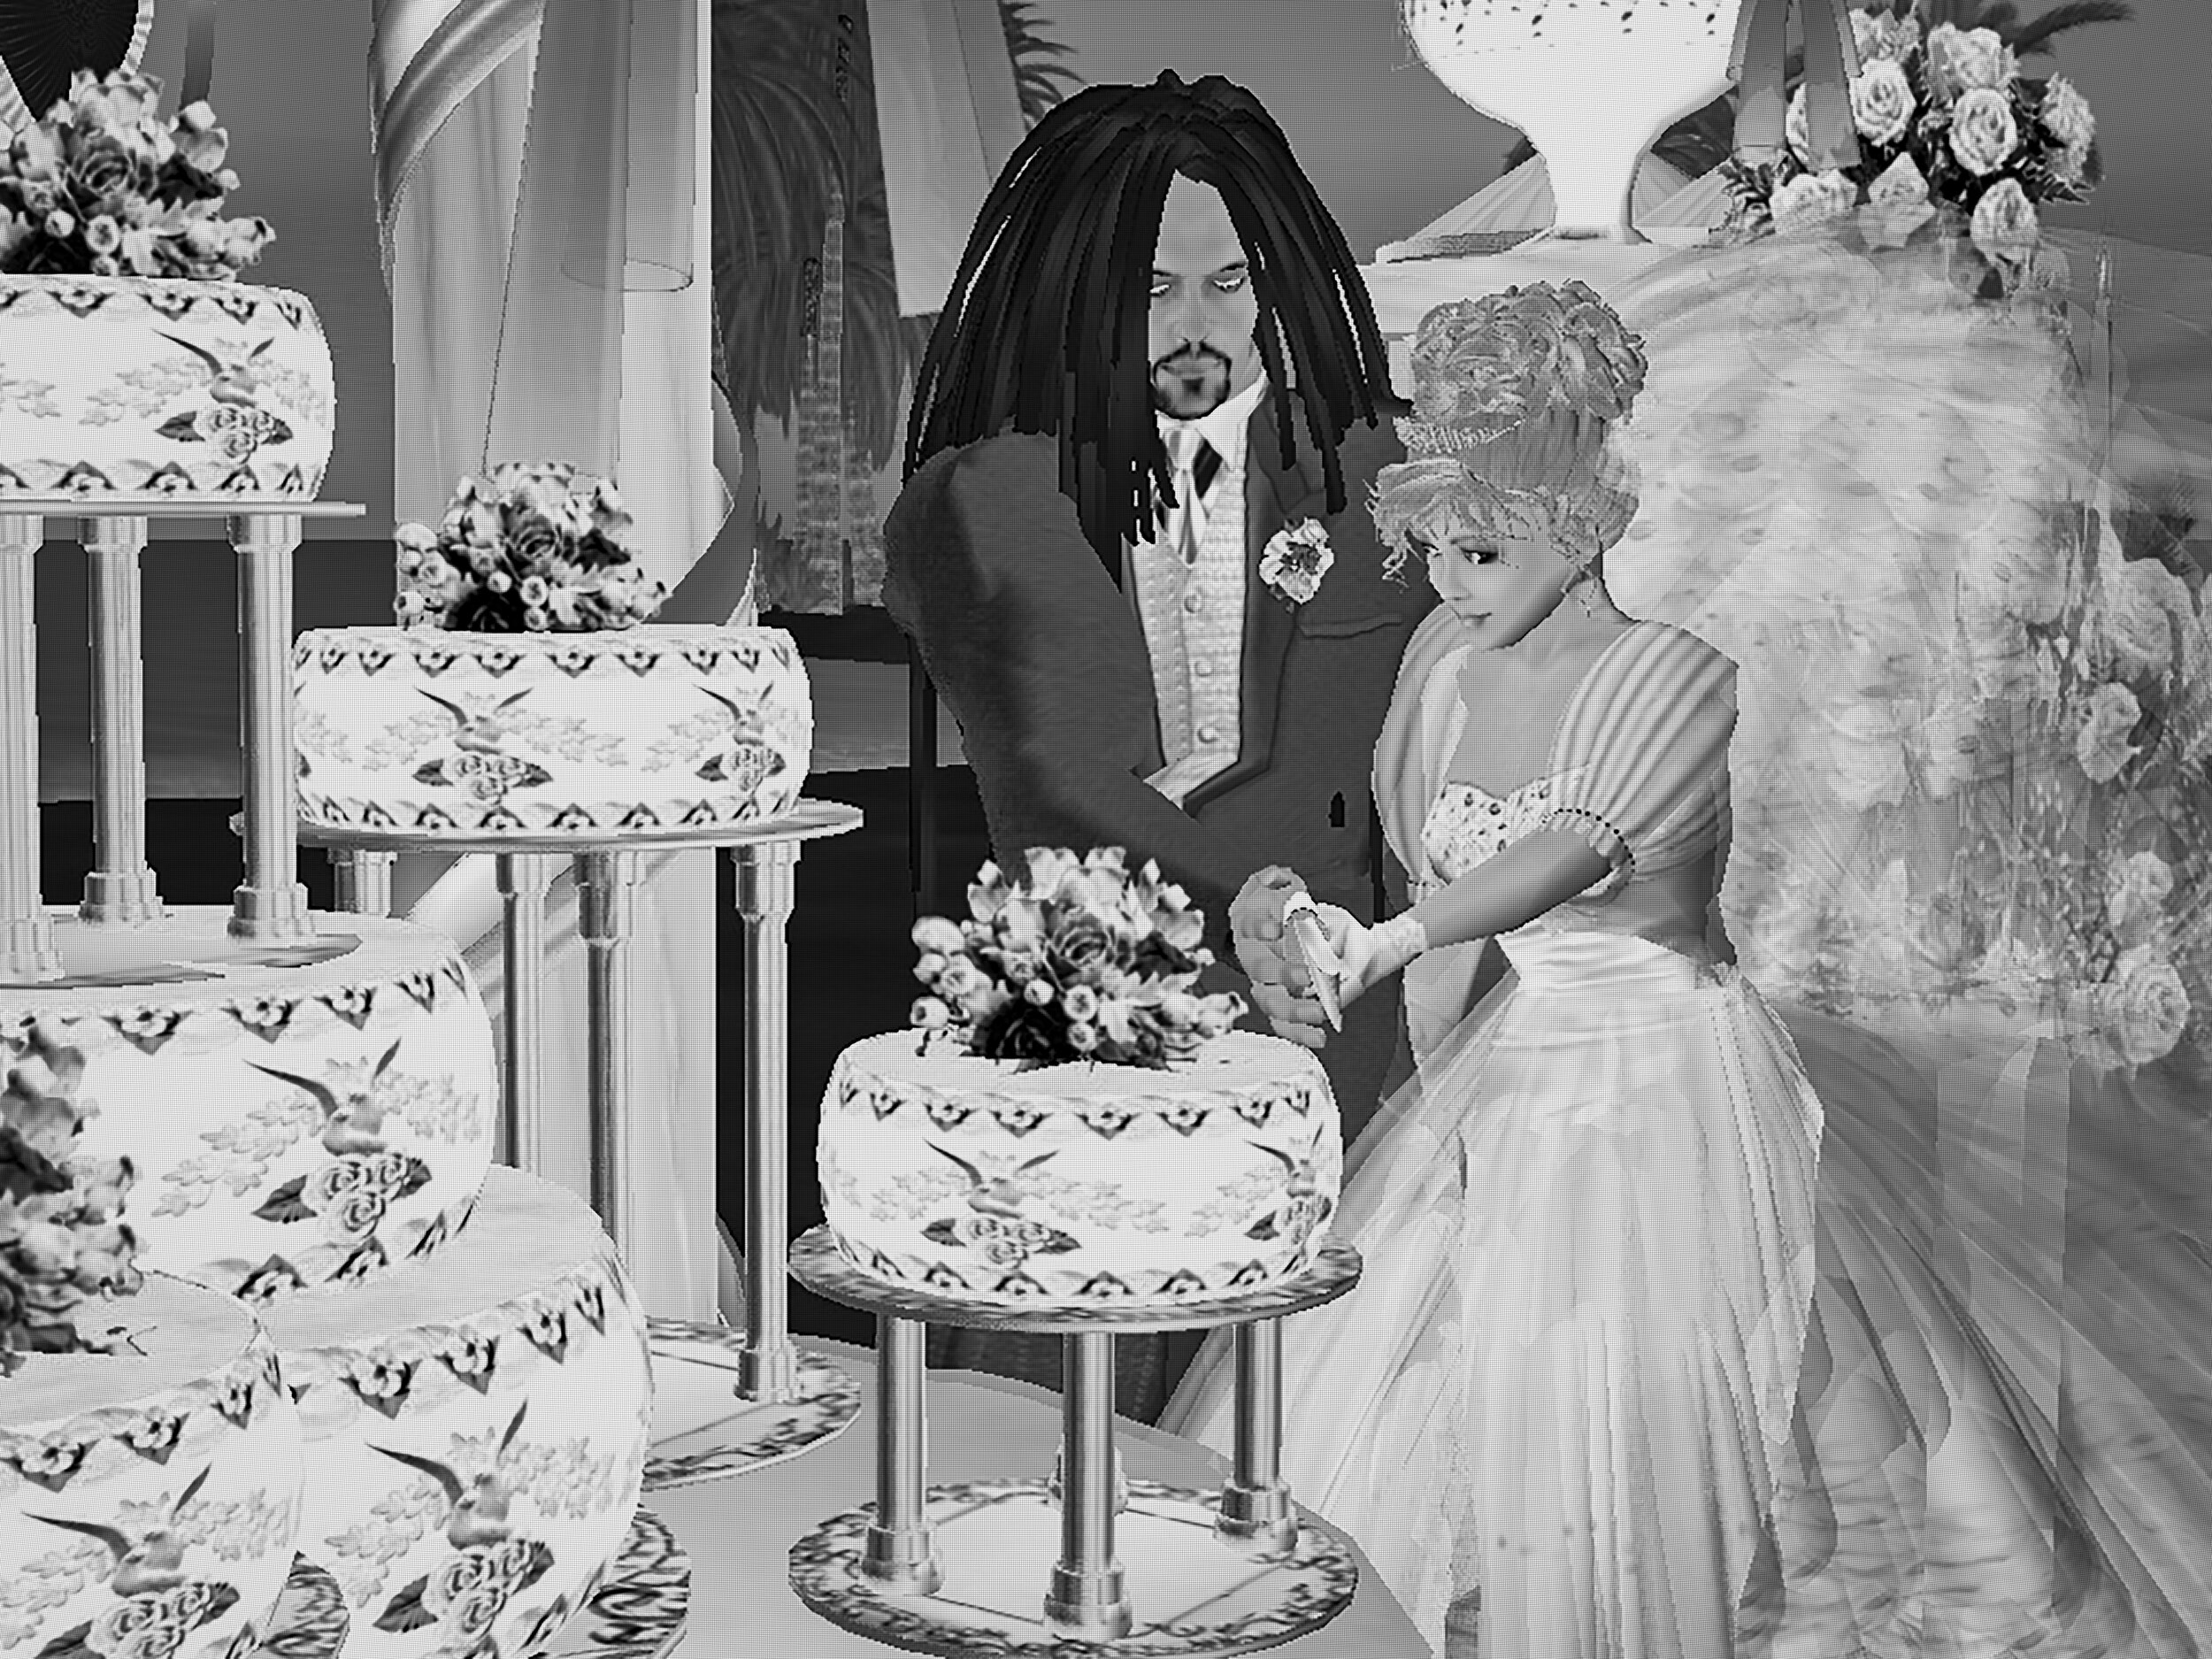  Newly weds cut their wedding cake.    part of Second Lives book   